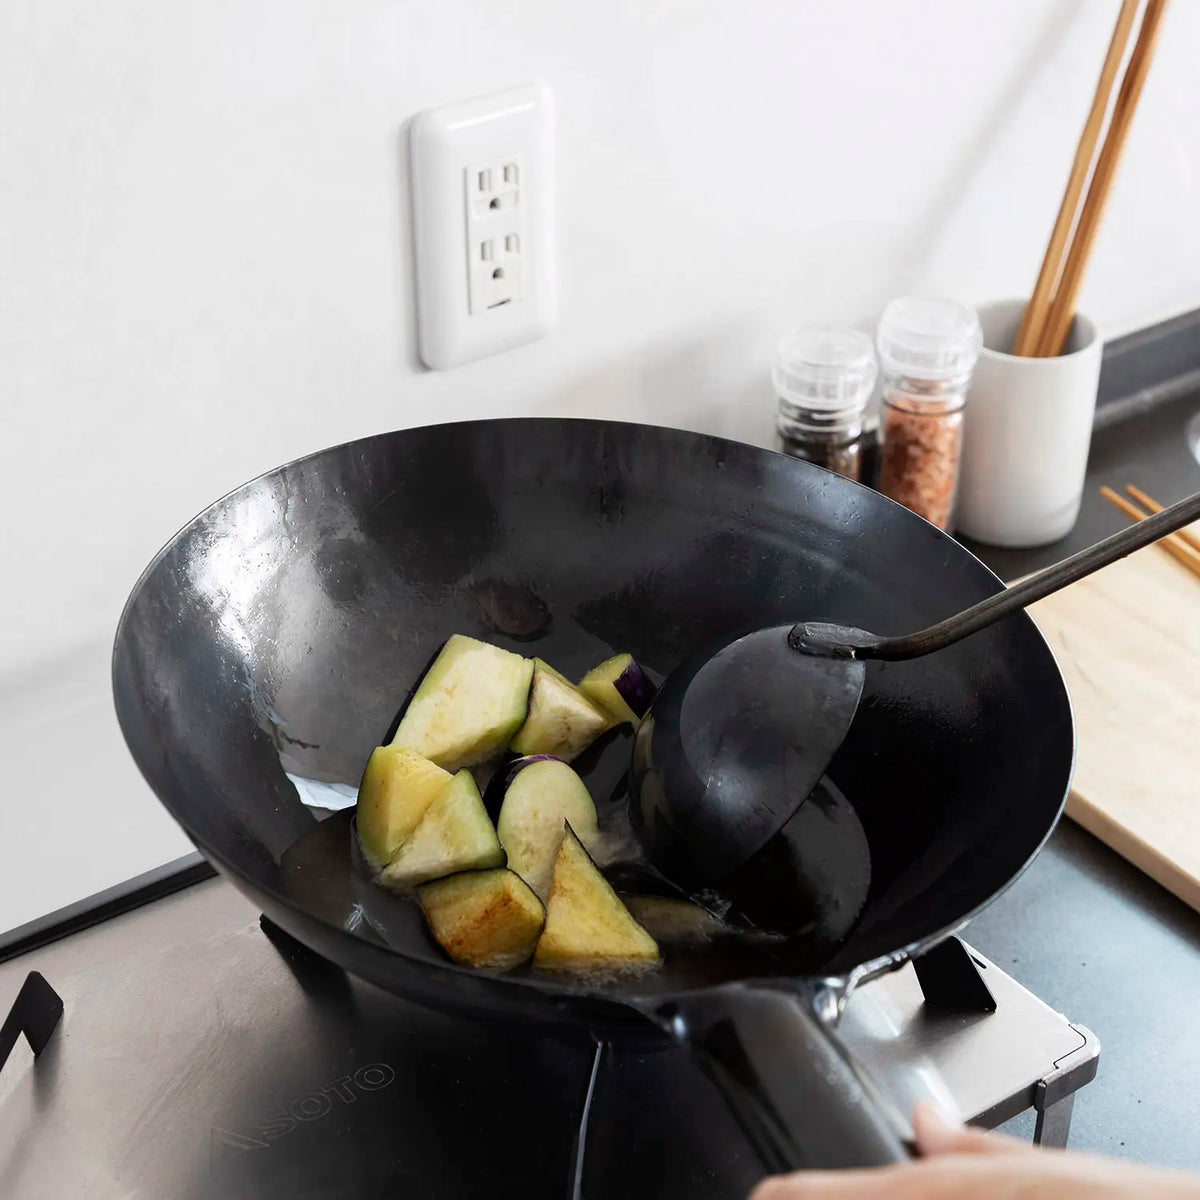 How to Season a Wok? Here are 3 options to consider - Viet World Kitchen